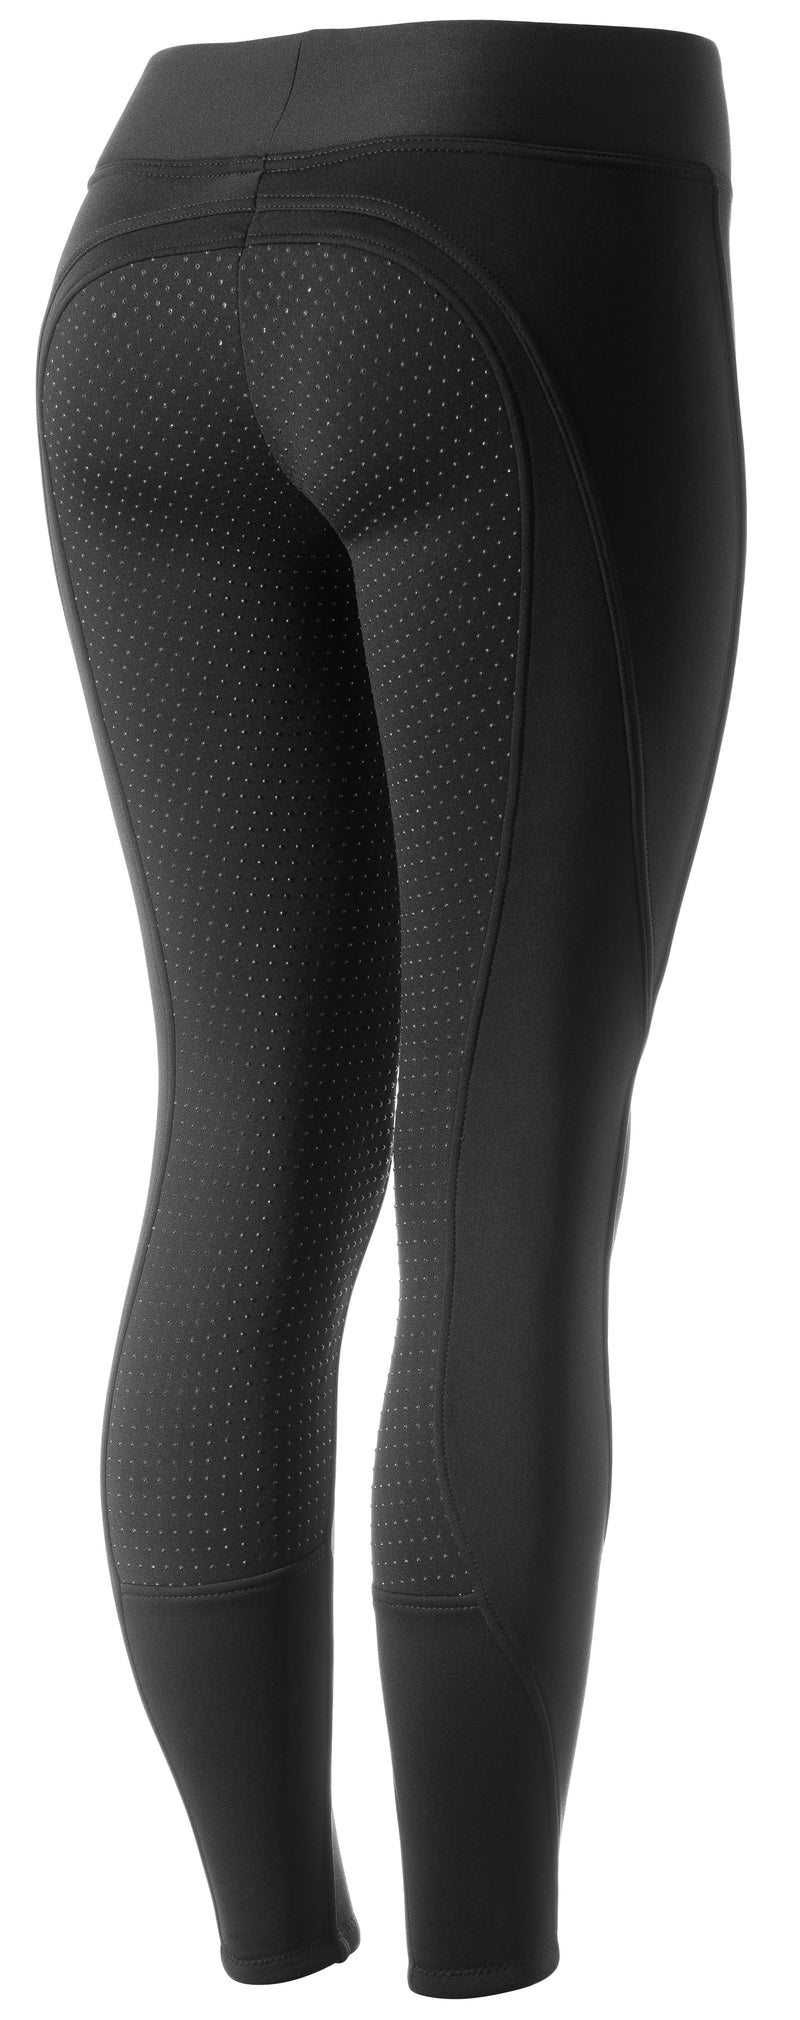 Horze Women's Active Winter Silicone Full Seat Tights